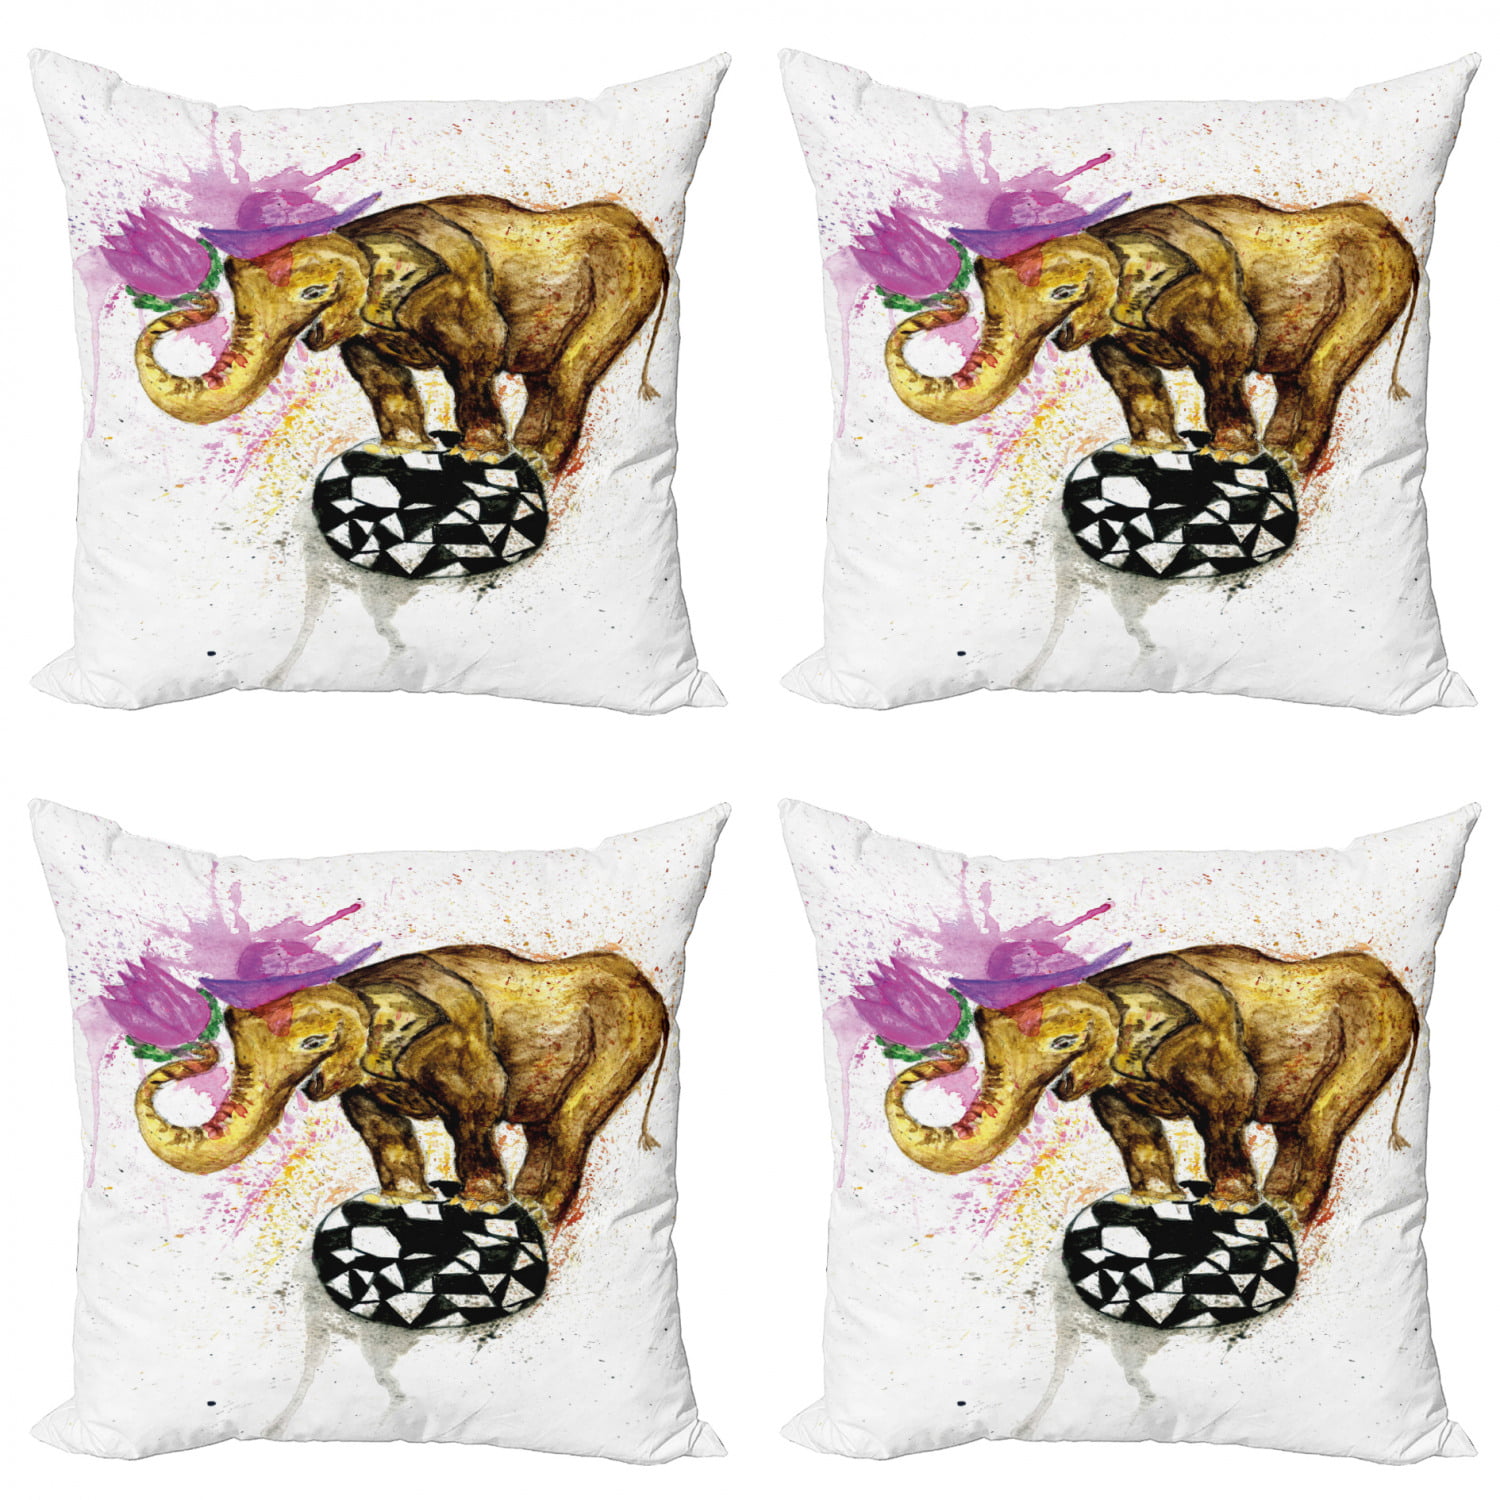 18x18 Elephant Gifts and Apparel Gifts Colorful Art Style Elephant Throw Pillow Multicolor